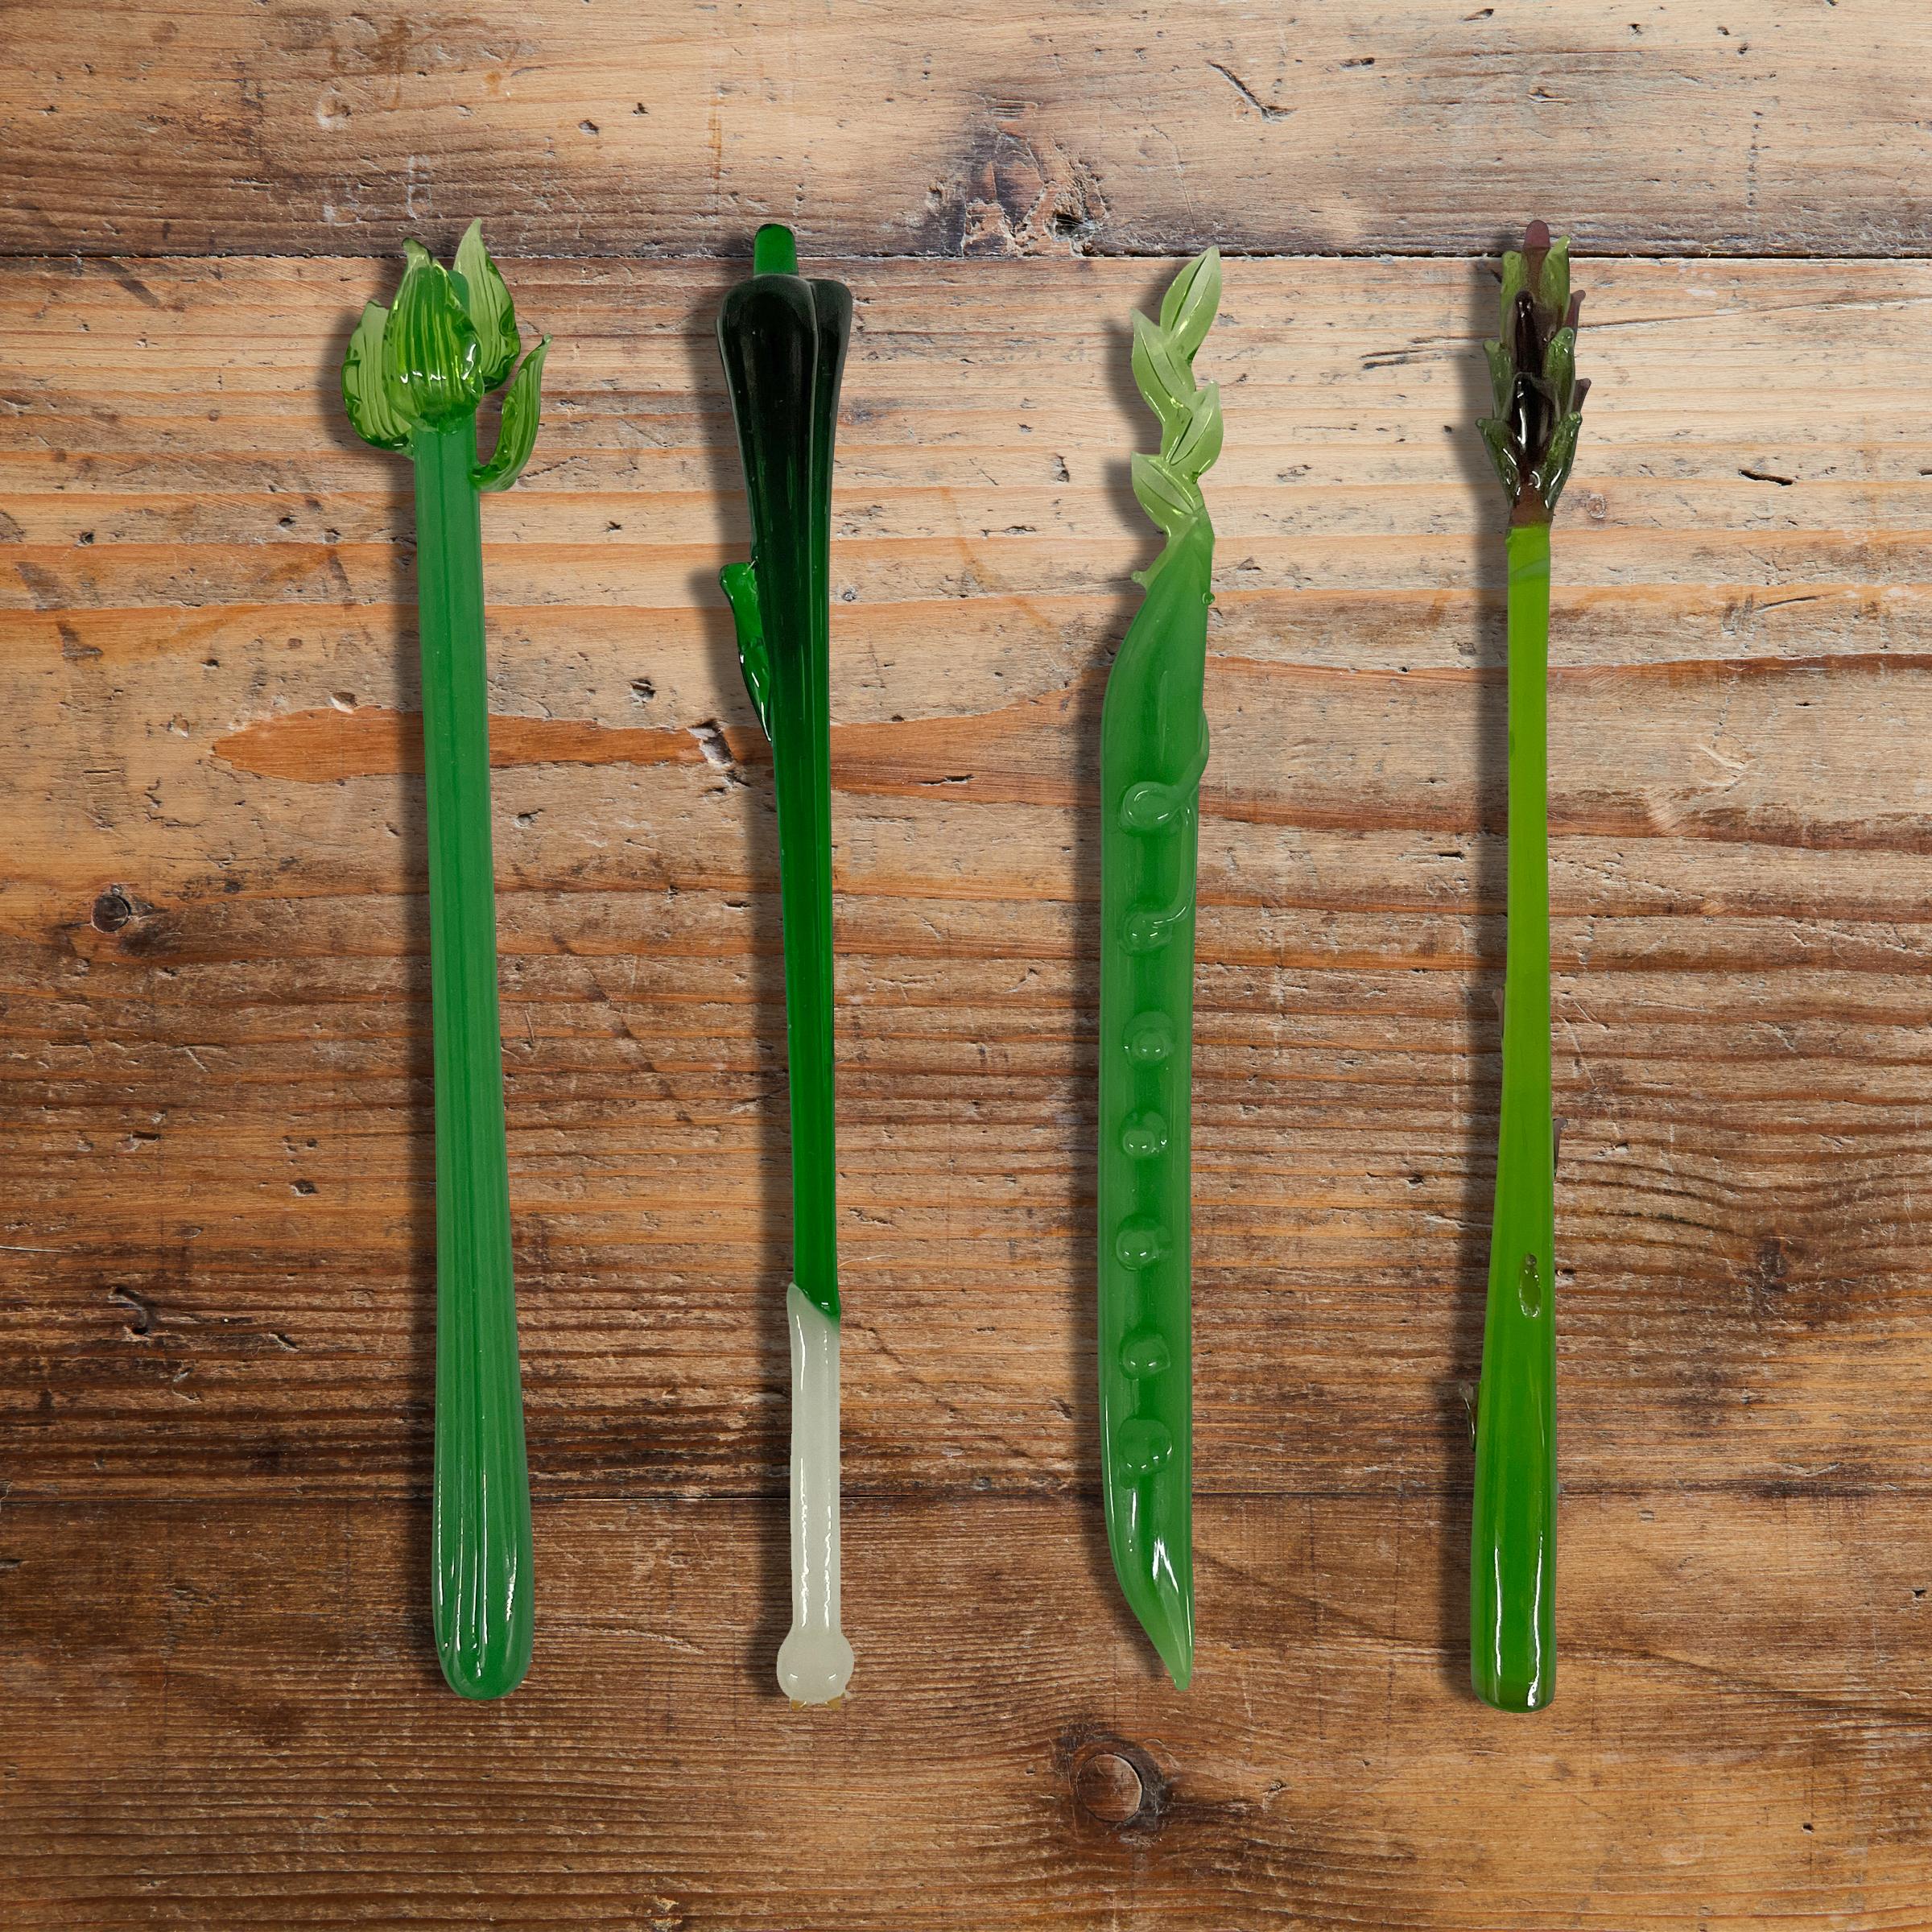 A cheeky set of four vintage hand-blown glass Bloody Mary swizzle sticks depicting four vegetables, a celery rib, a green onion, a snow pea pod, and an asparagus stalk, waiting for your next hair-of-the-dog indulgence.